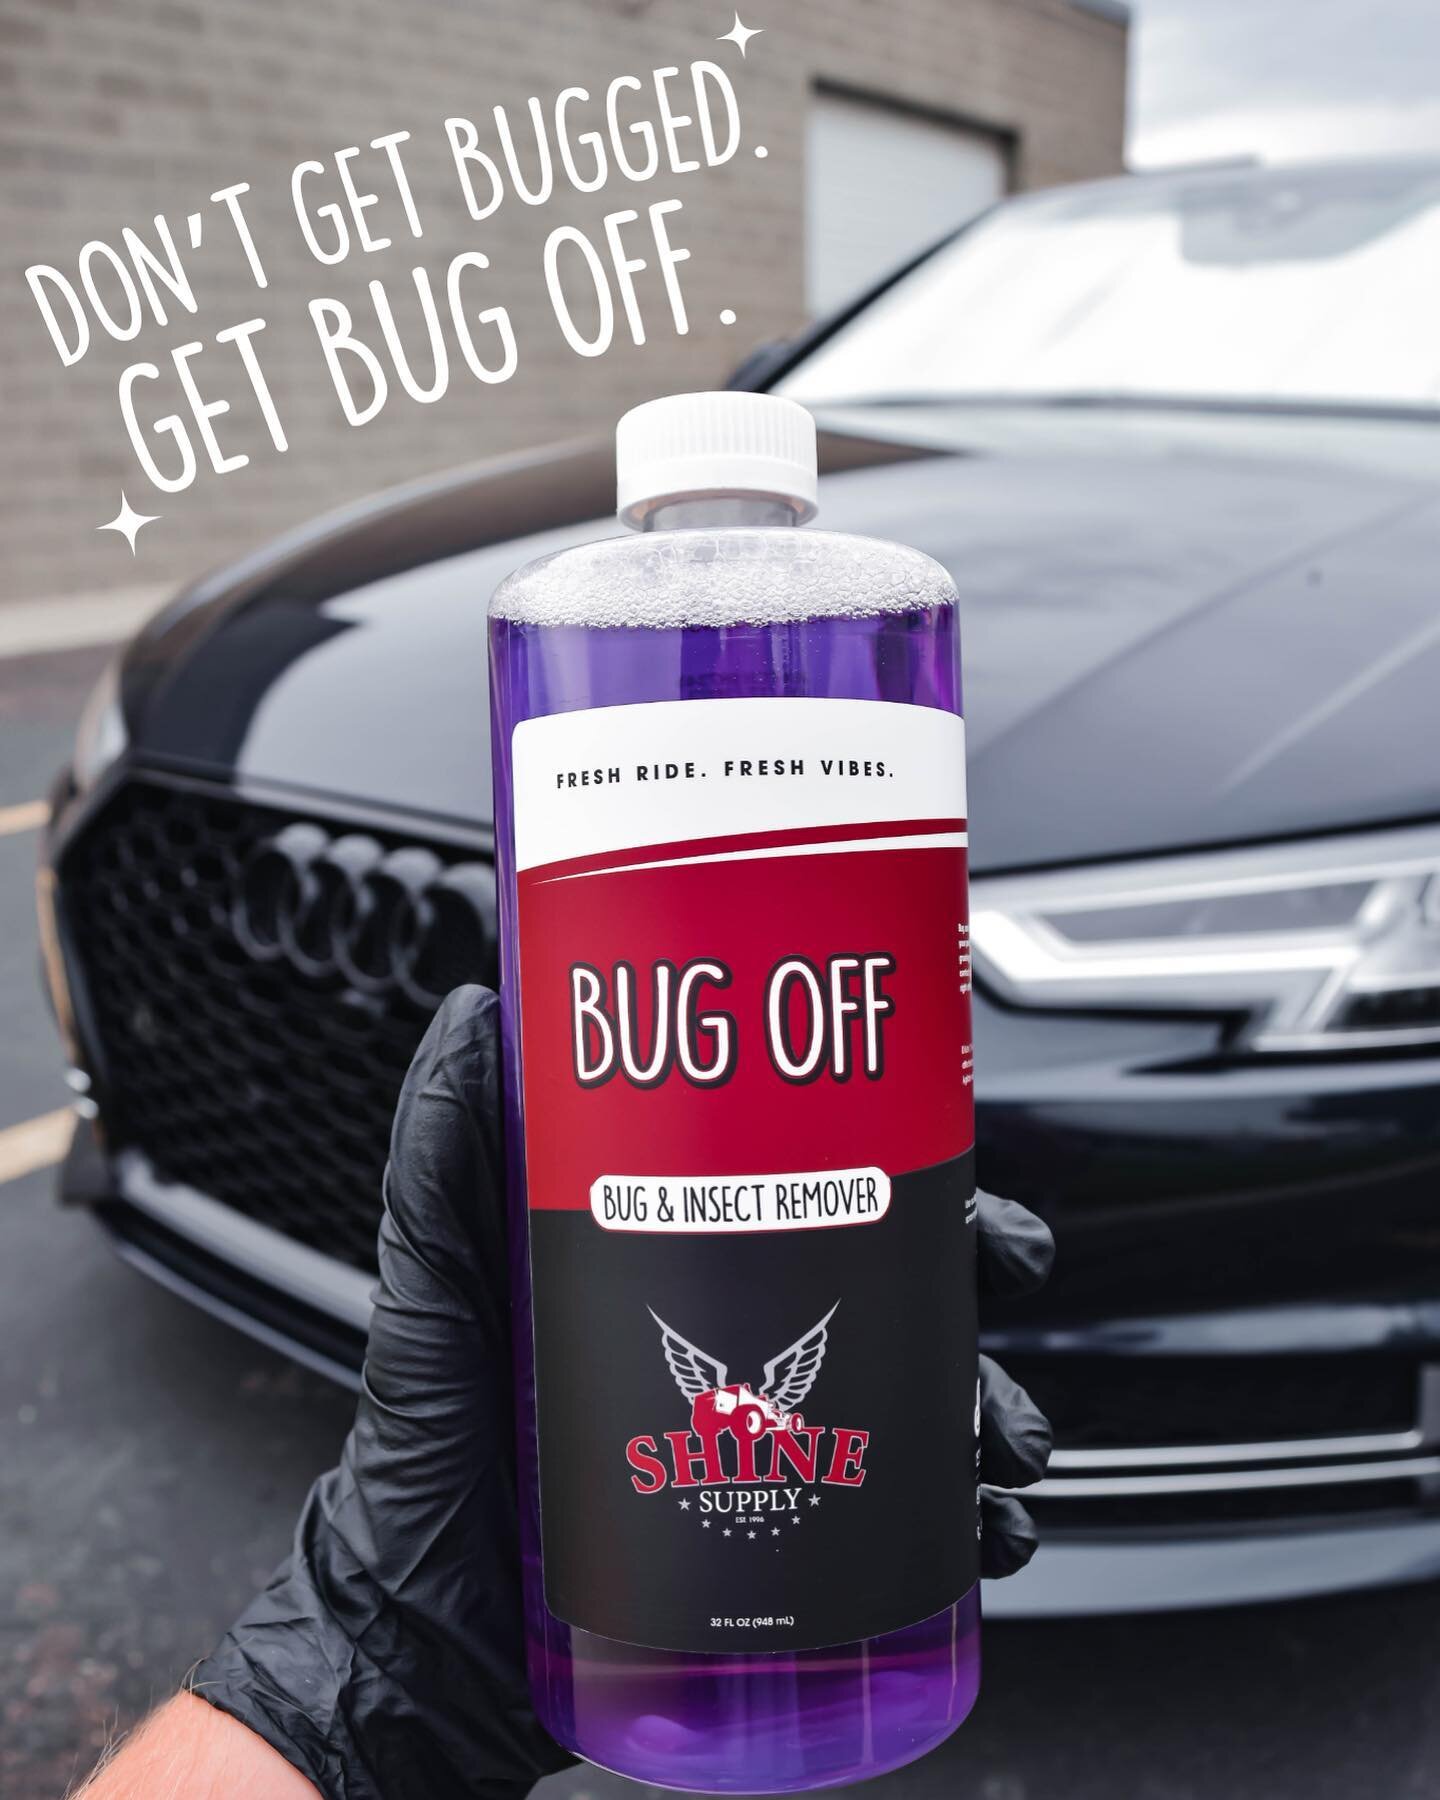 Did you know that bug remains can damage your vehicle? Smashed bugs release acidic goop that can bind to the surface of your paint, causing etchings and discolorations. That&rsquo;s where Bug Off comes in!
&zwnj;
Bug Off easily removes bugs and insec